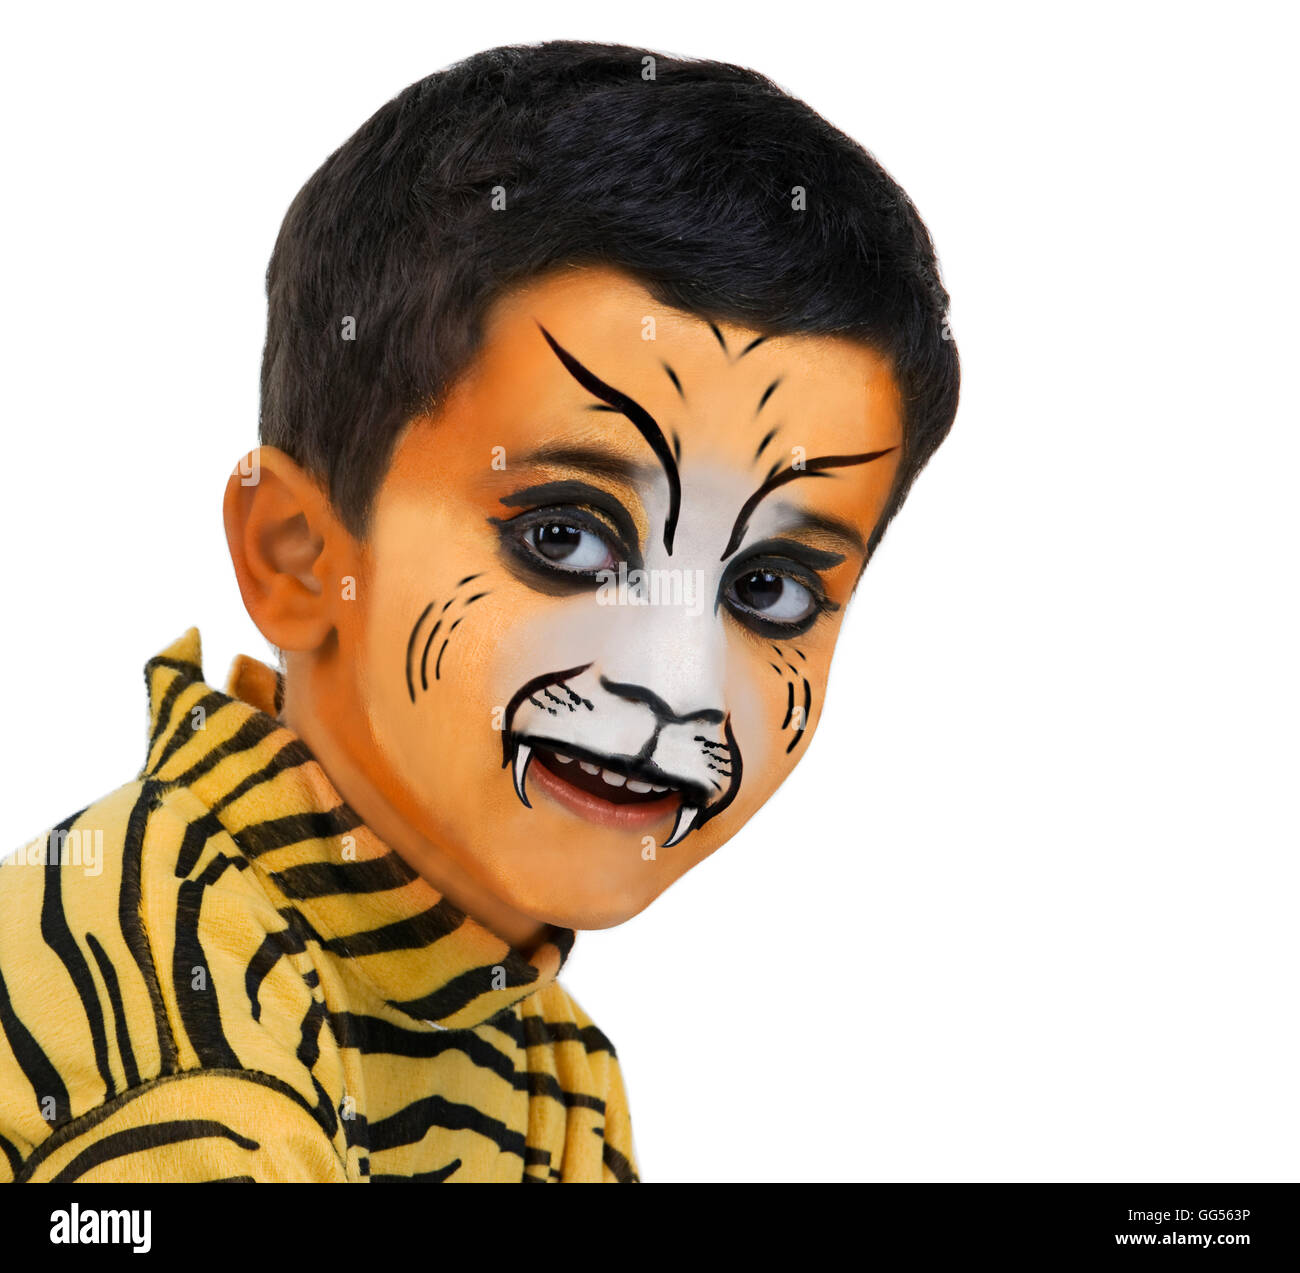 Portrait of a boy with tiger make-up Stock Photo